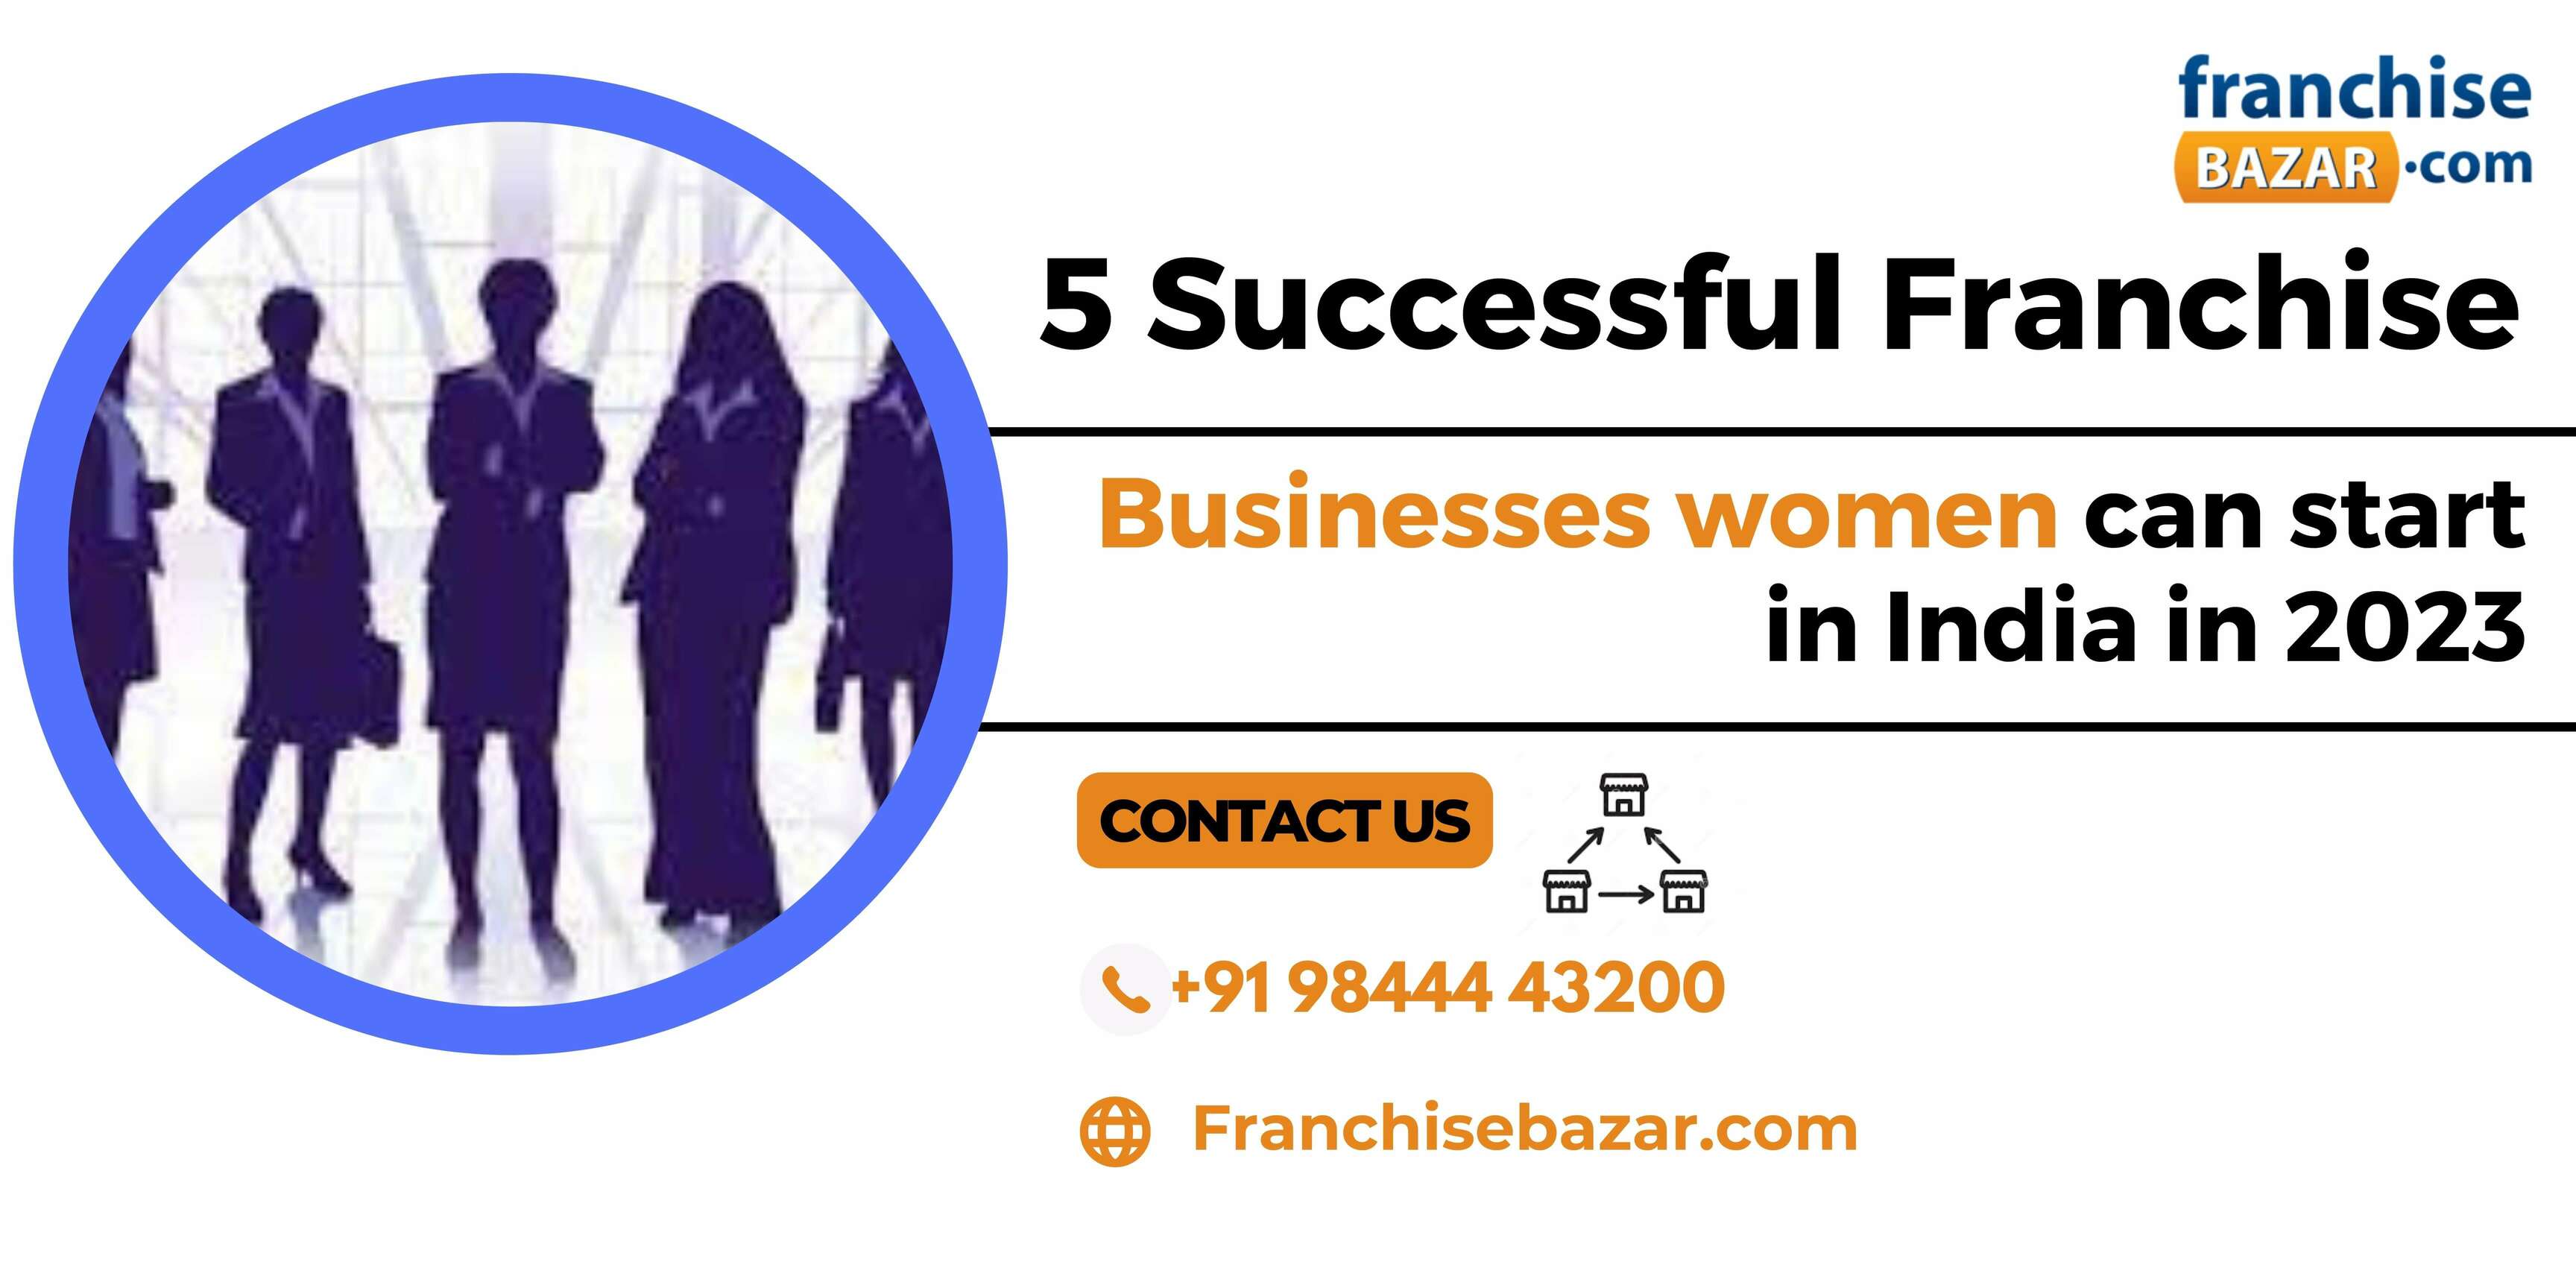 5 Successful Franchise Businesses women can start in India in 2023